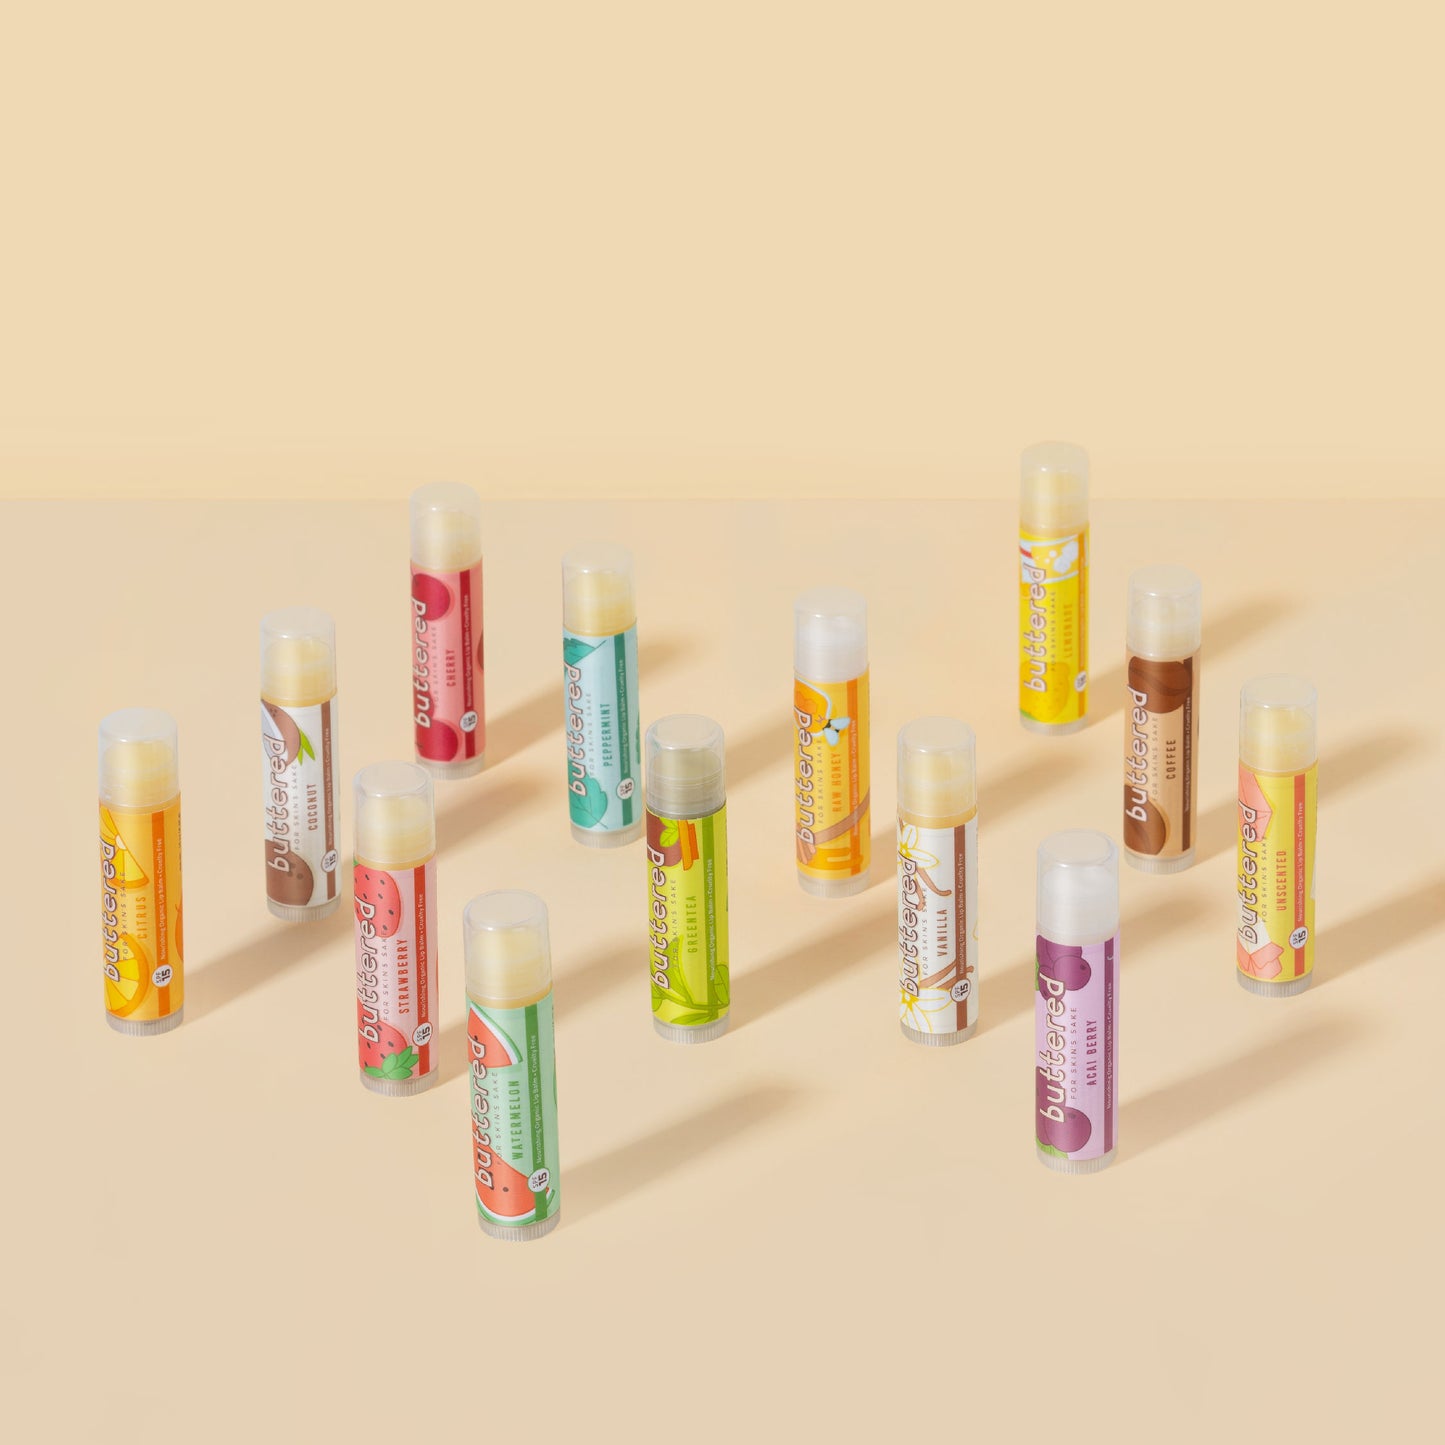 Buttered - Unscented Lip Balm SPF 15